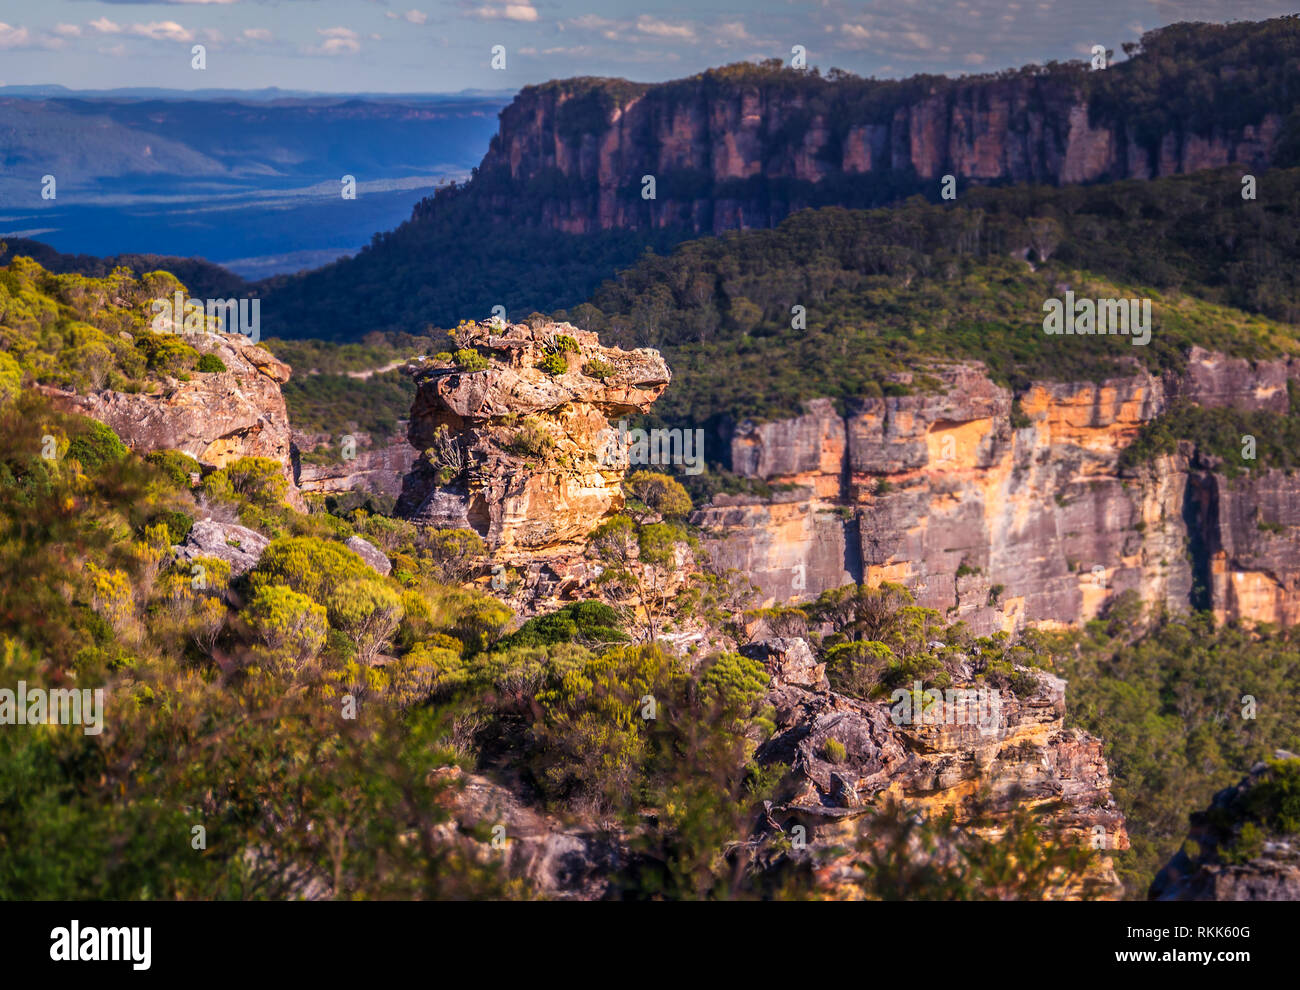 Katoomba, New South Wales, Australia. A view from the Boar's Head Lookout into the Jamison Valley.  The blue mountains, Australia. Stock Photo